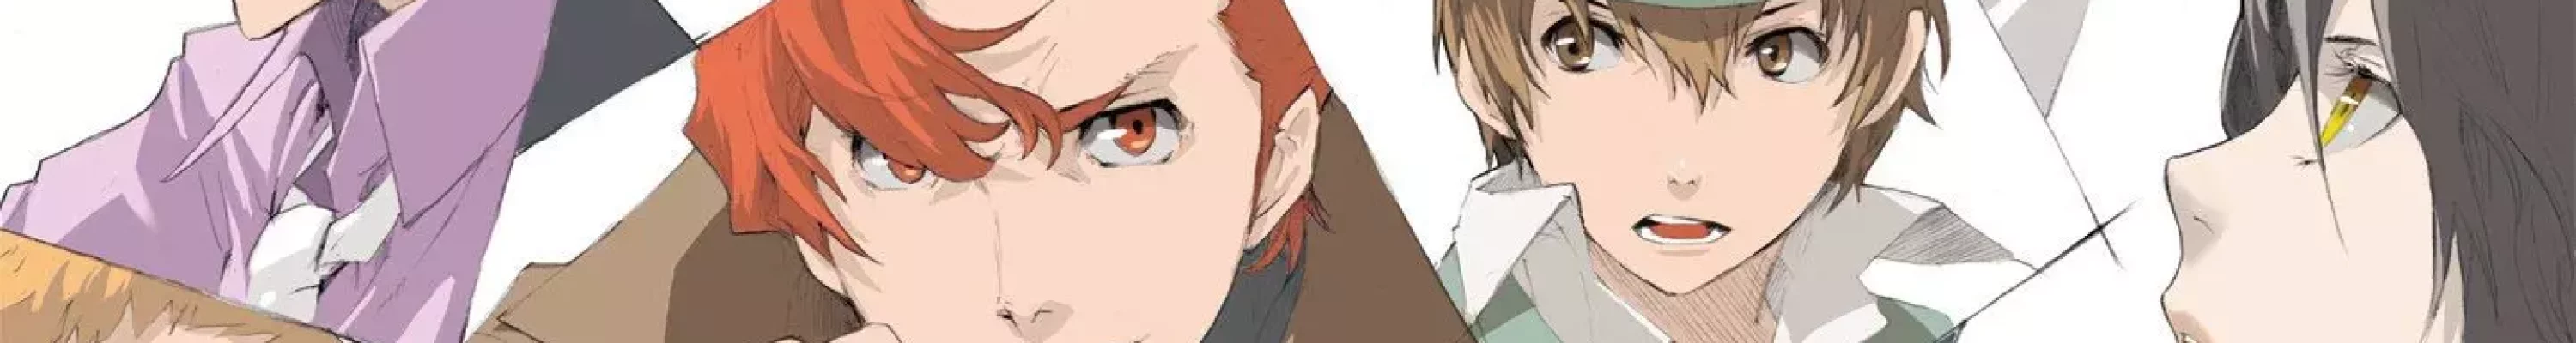 baccano-faces-characters-young-man